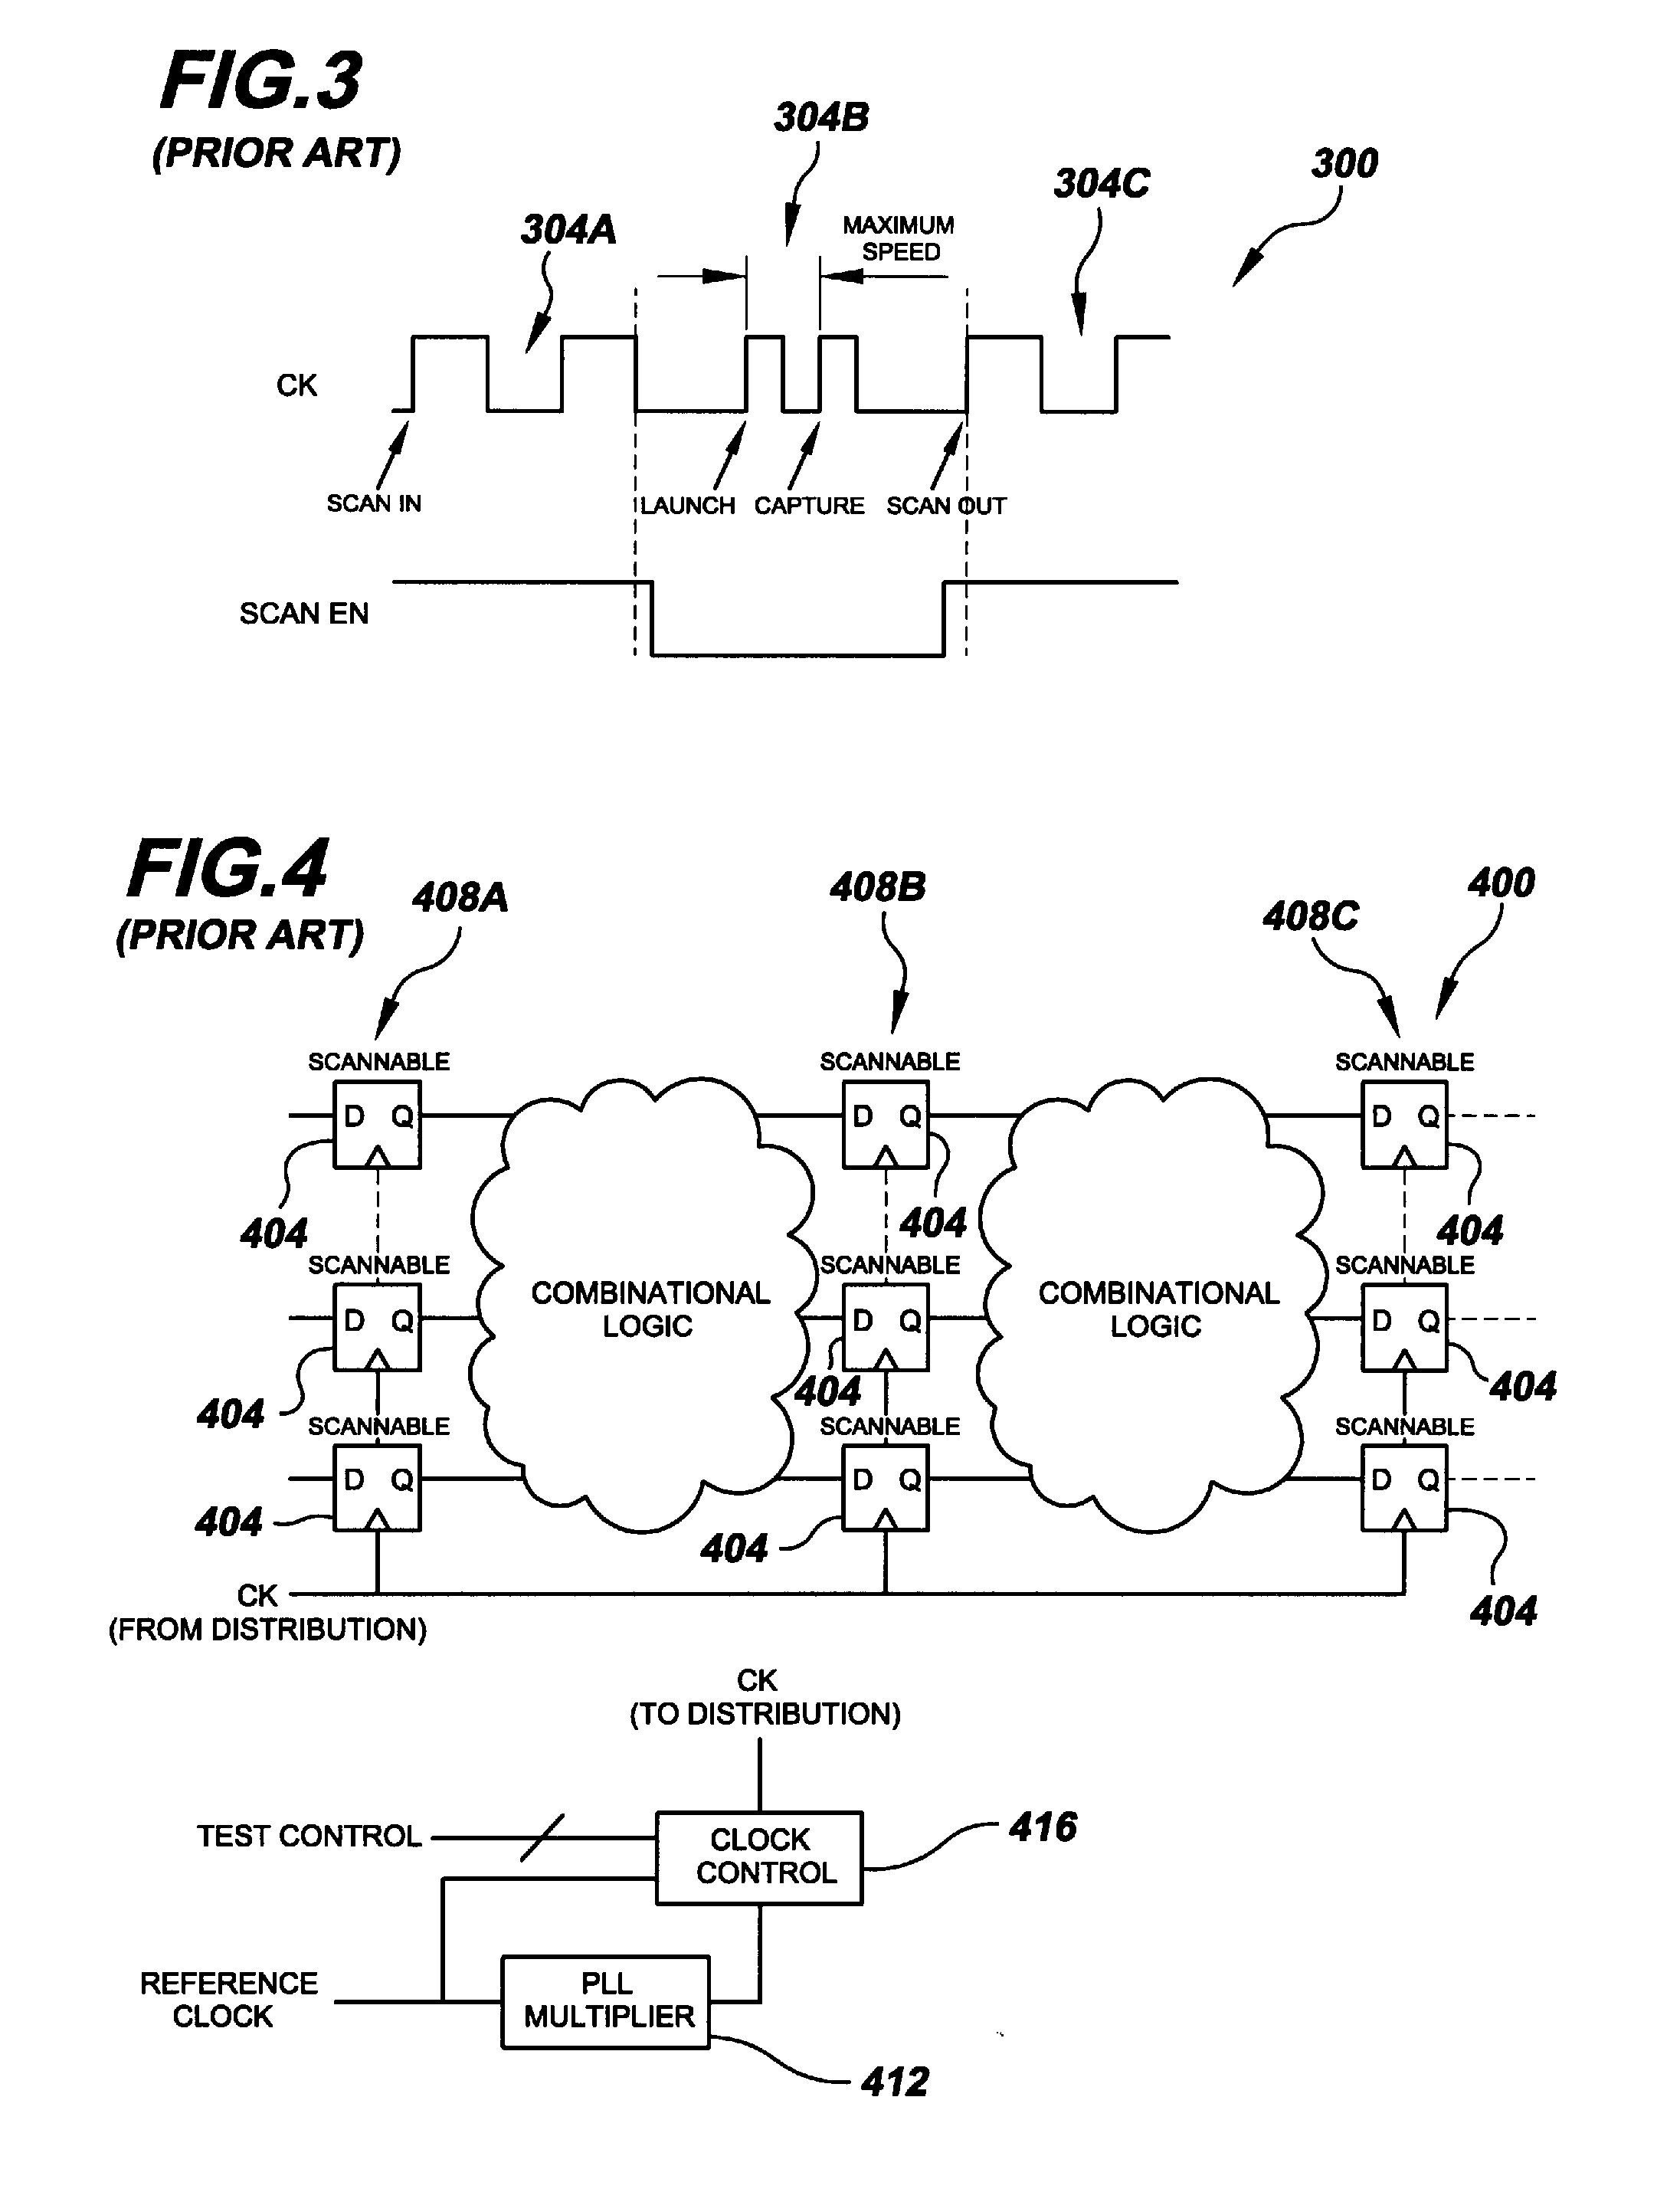 Systems and Methods for Testing and Diagnosing Delay Faults and For Parametric Testing in Digital Circuits